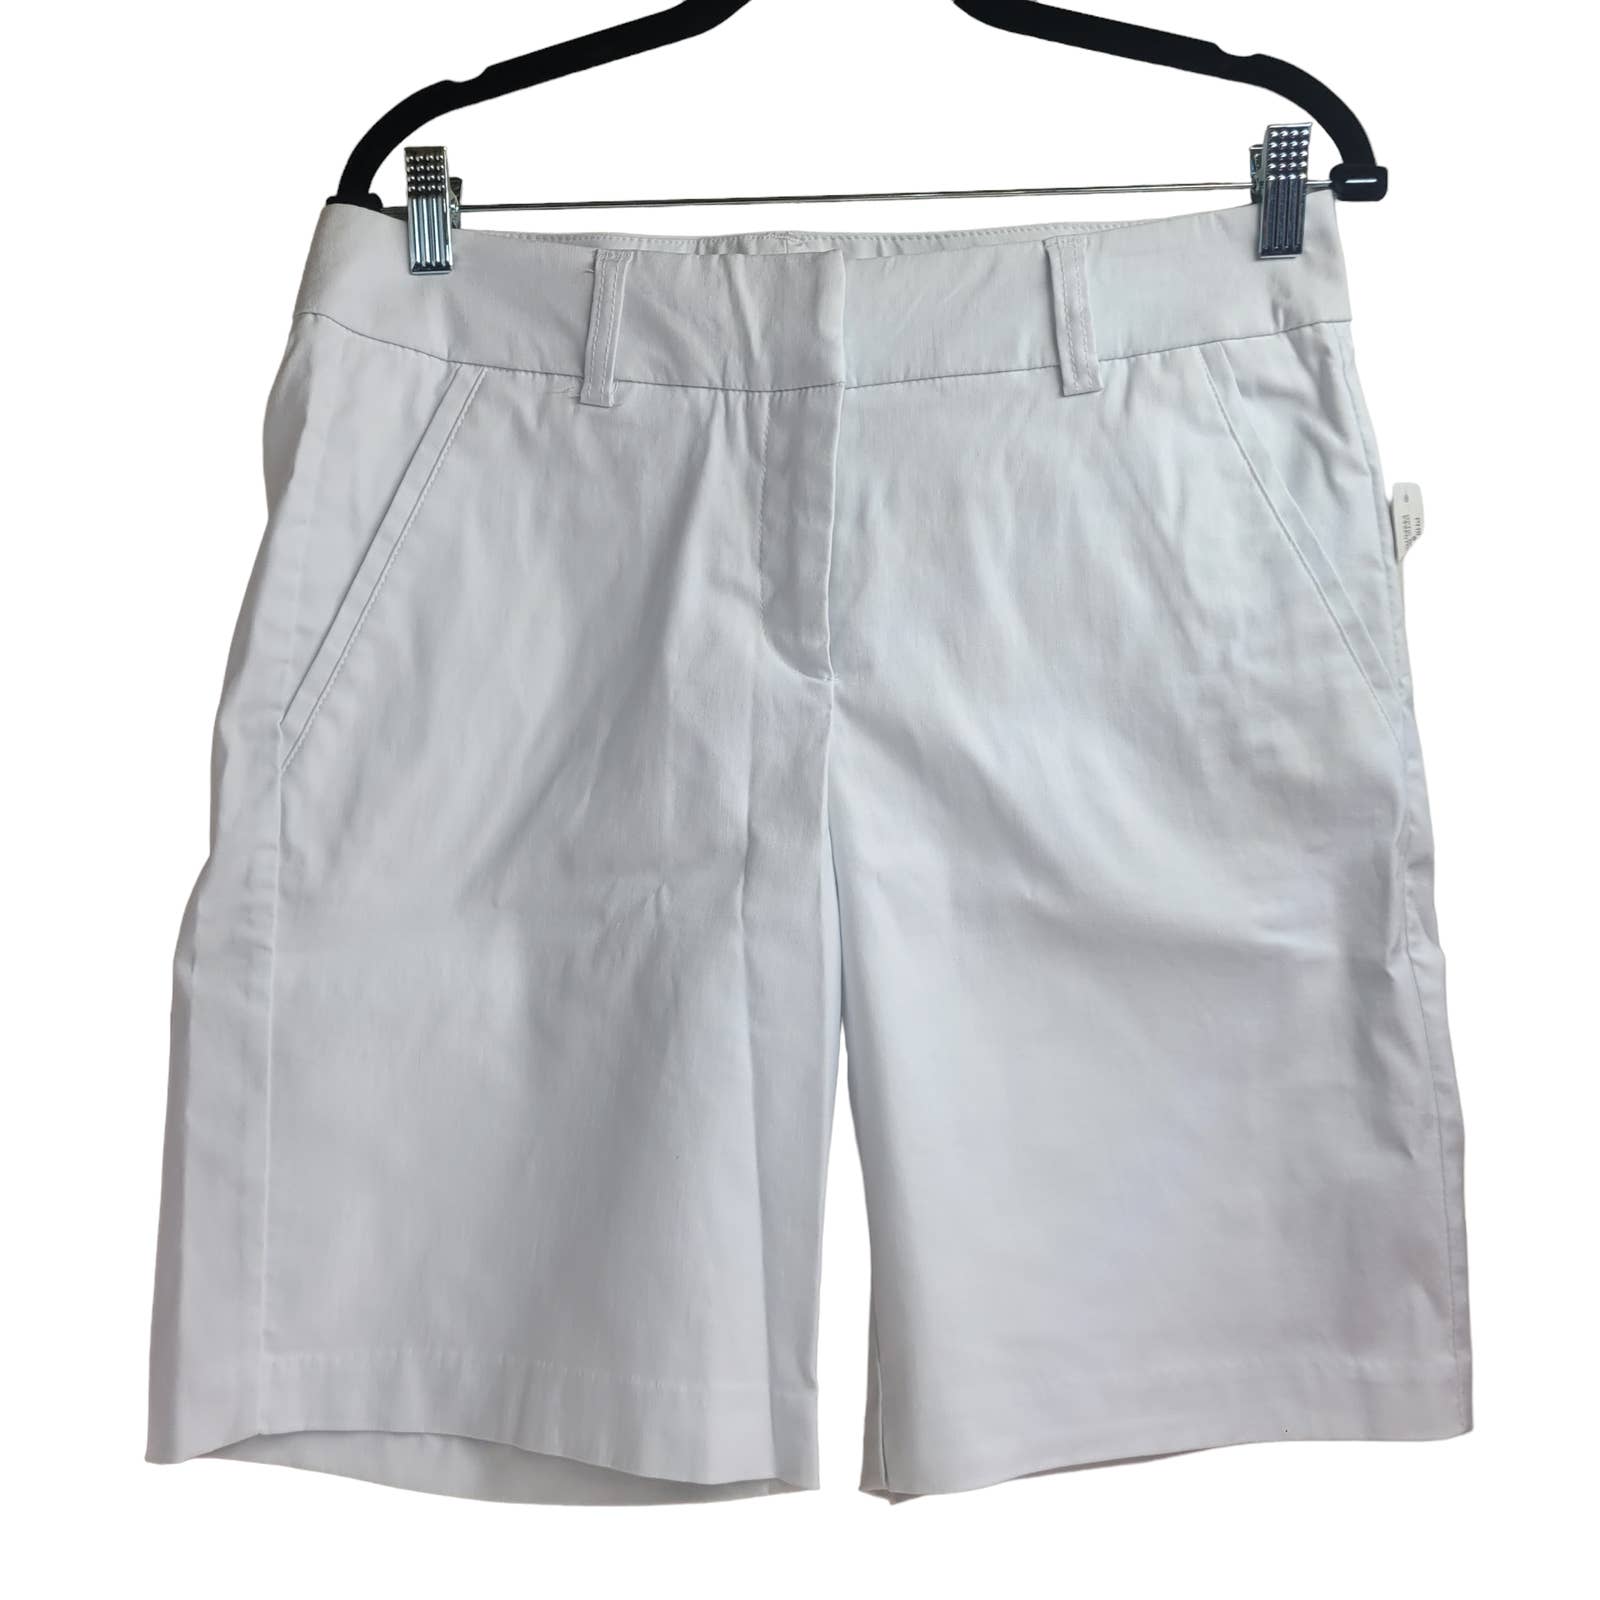 New Directions White Bermuda Shorts Belt Loops Pockets Size 6